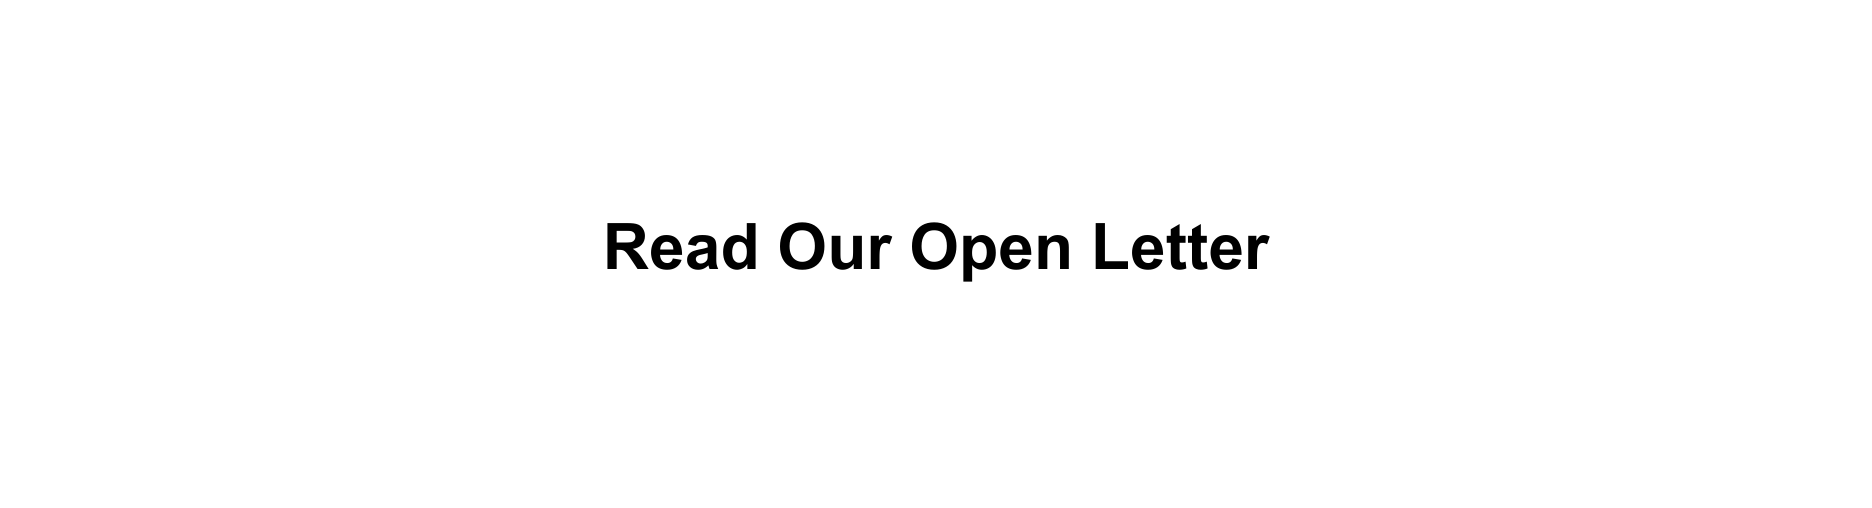 Read Our Open Letter